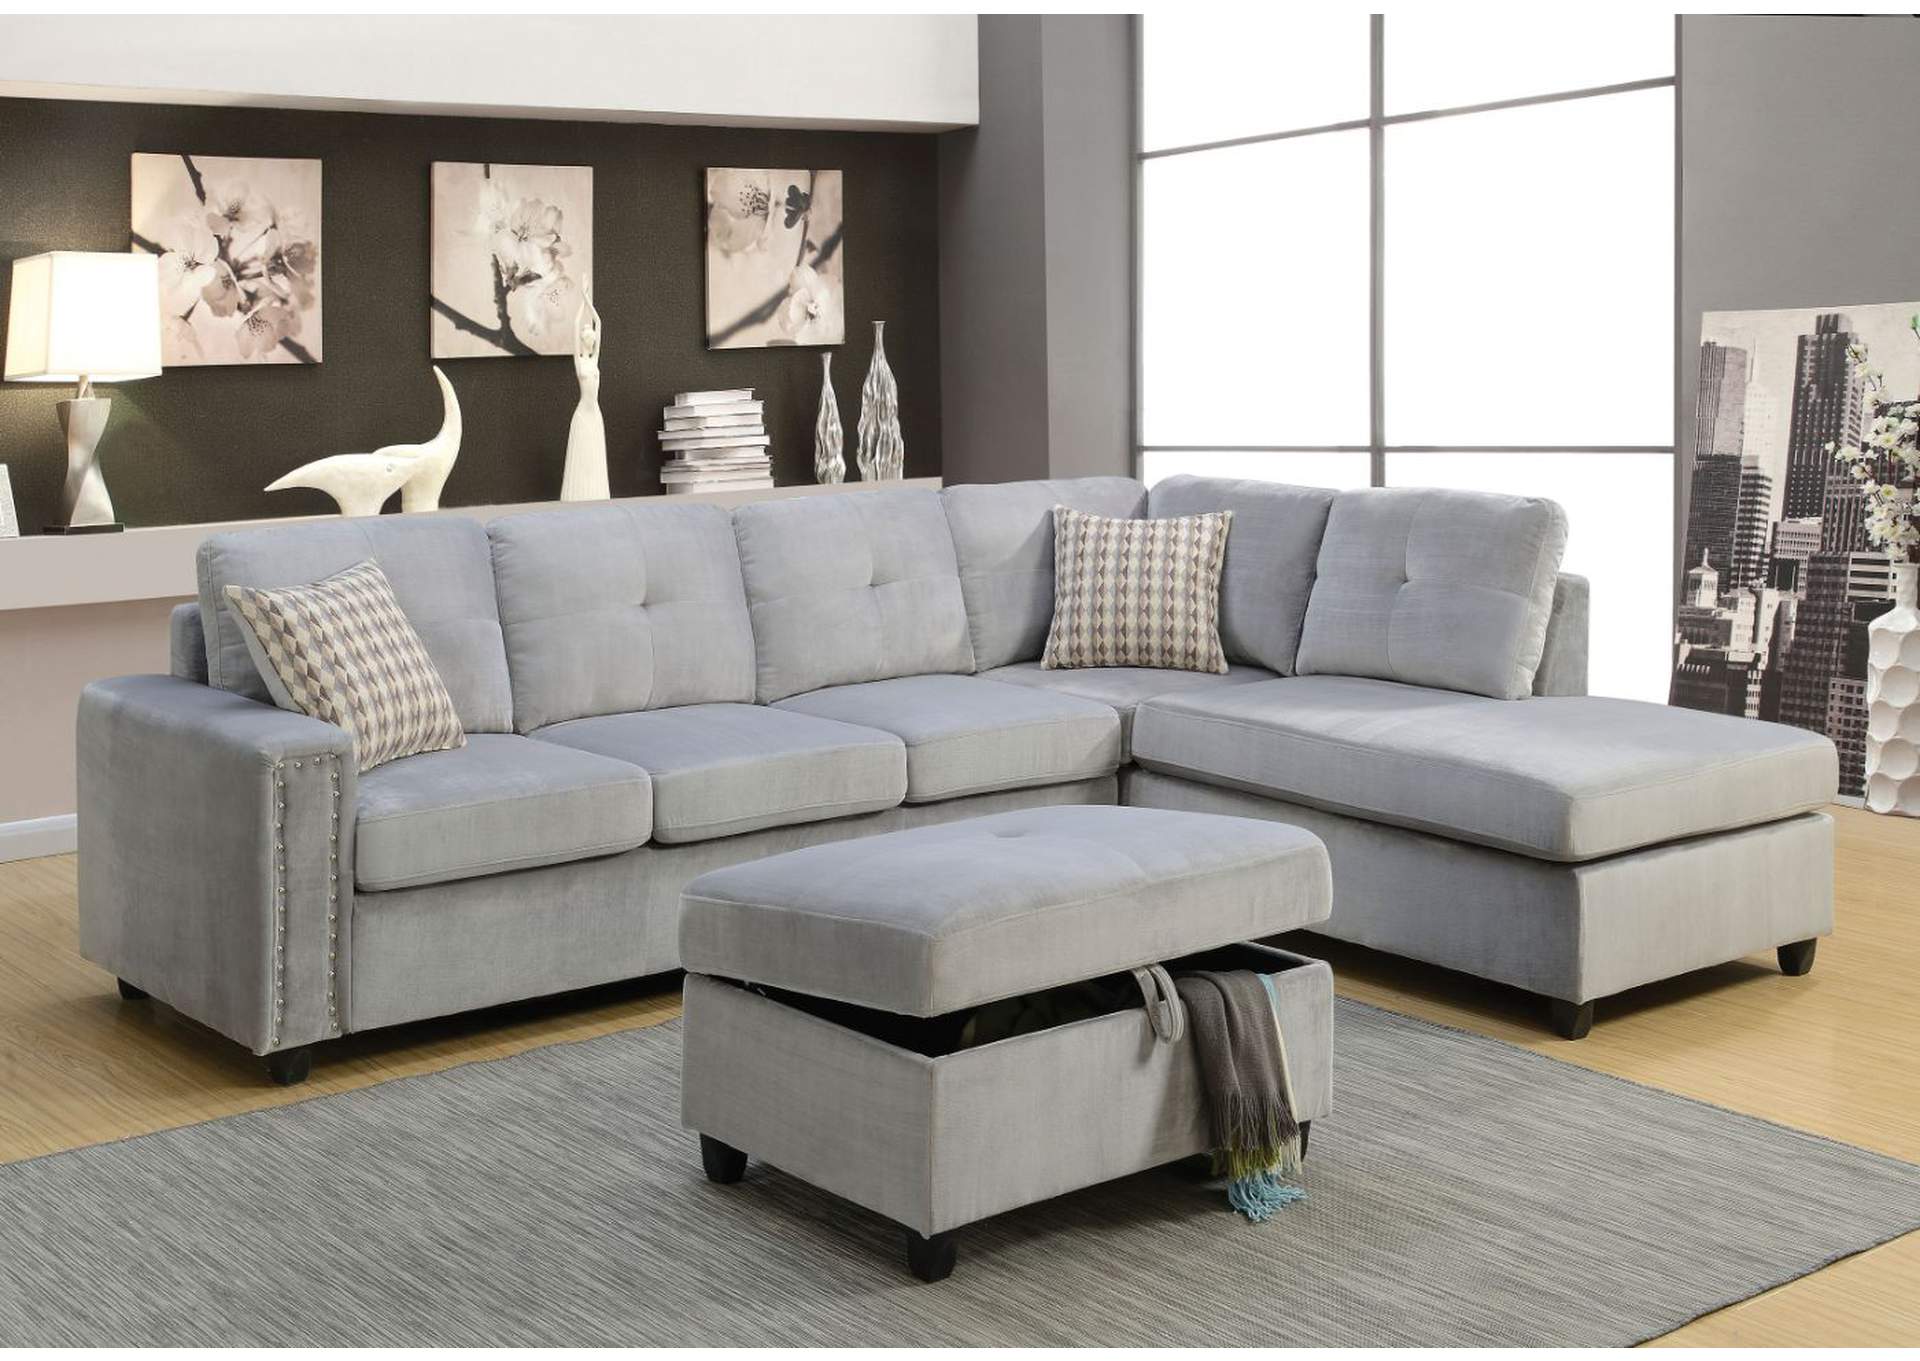 Belville Sectional Sofa,Acme